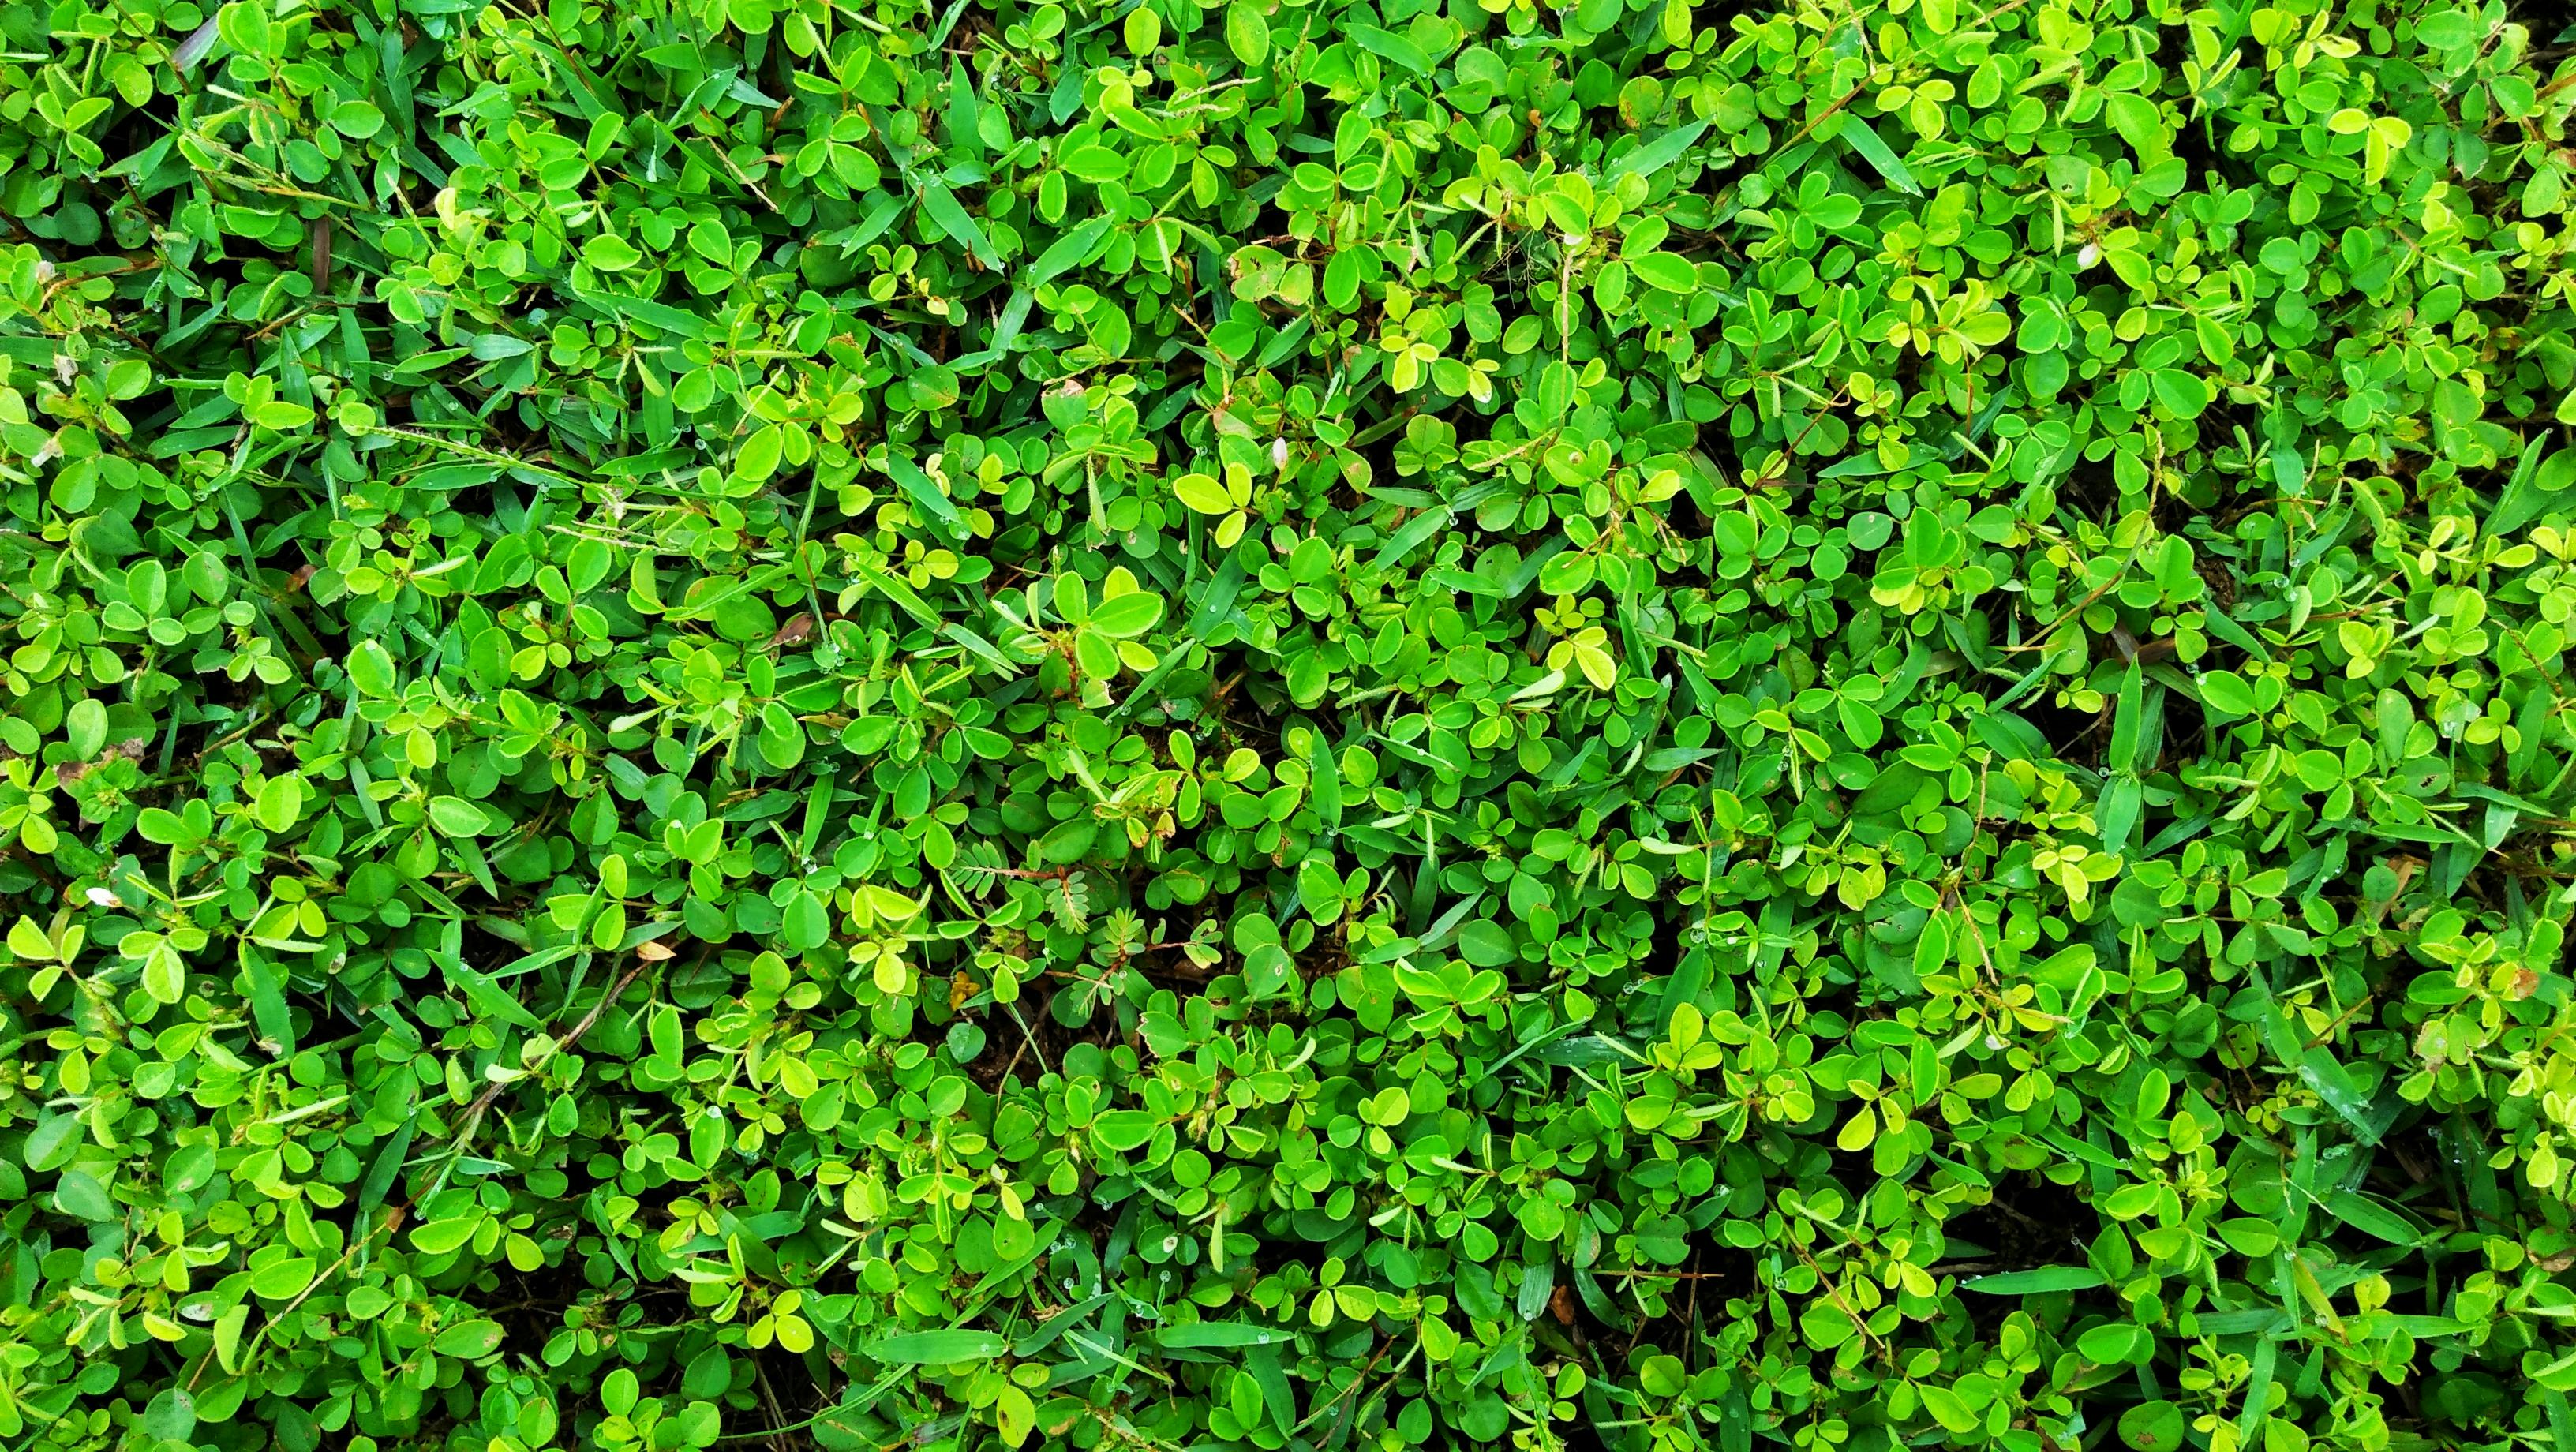 Free stock photo of #Green #Nature #Relax #Bright #Natural